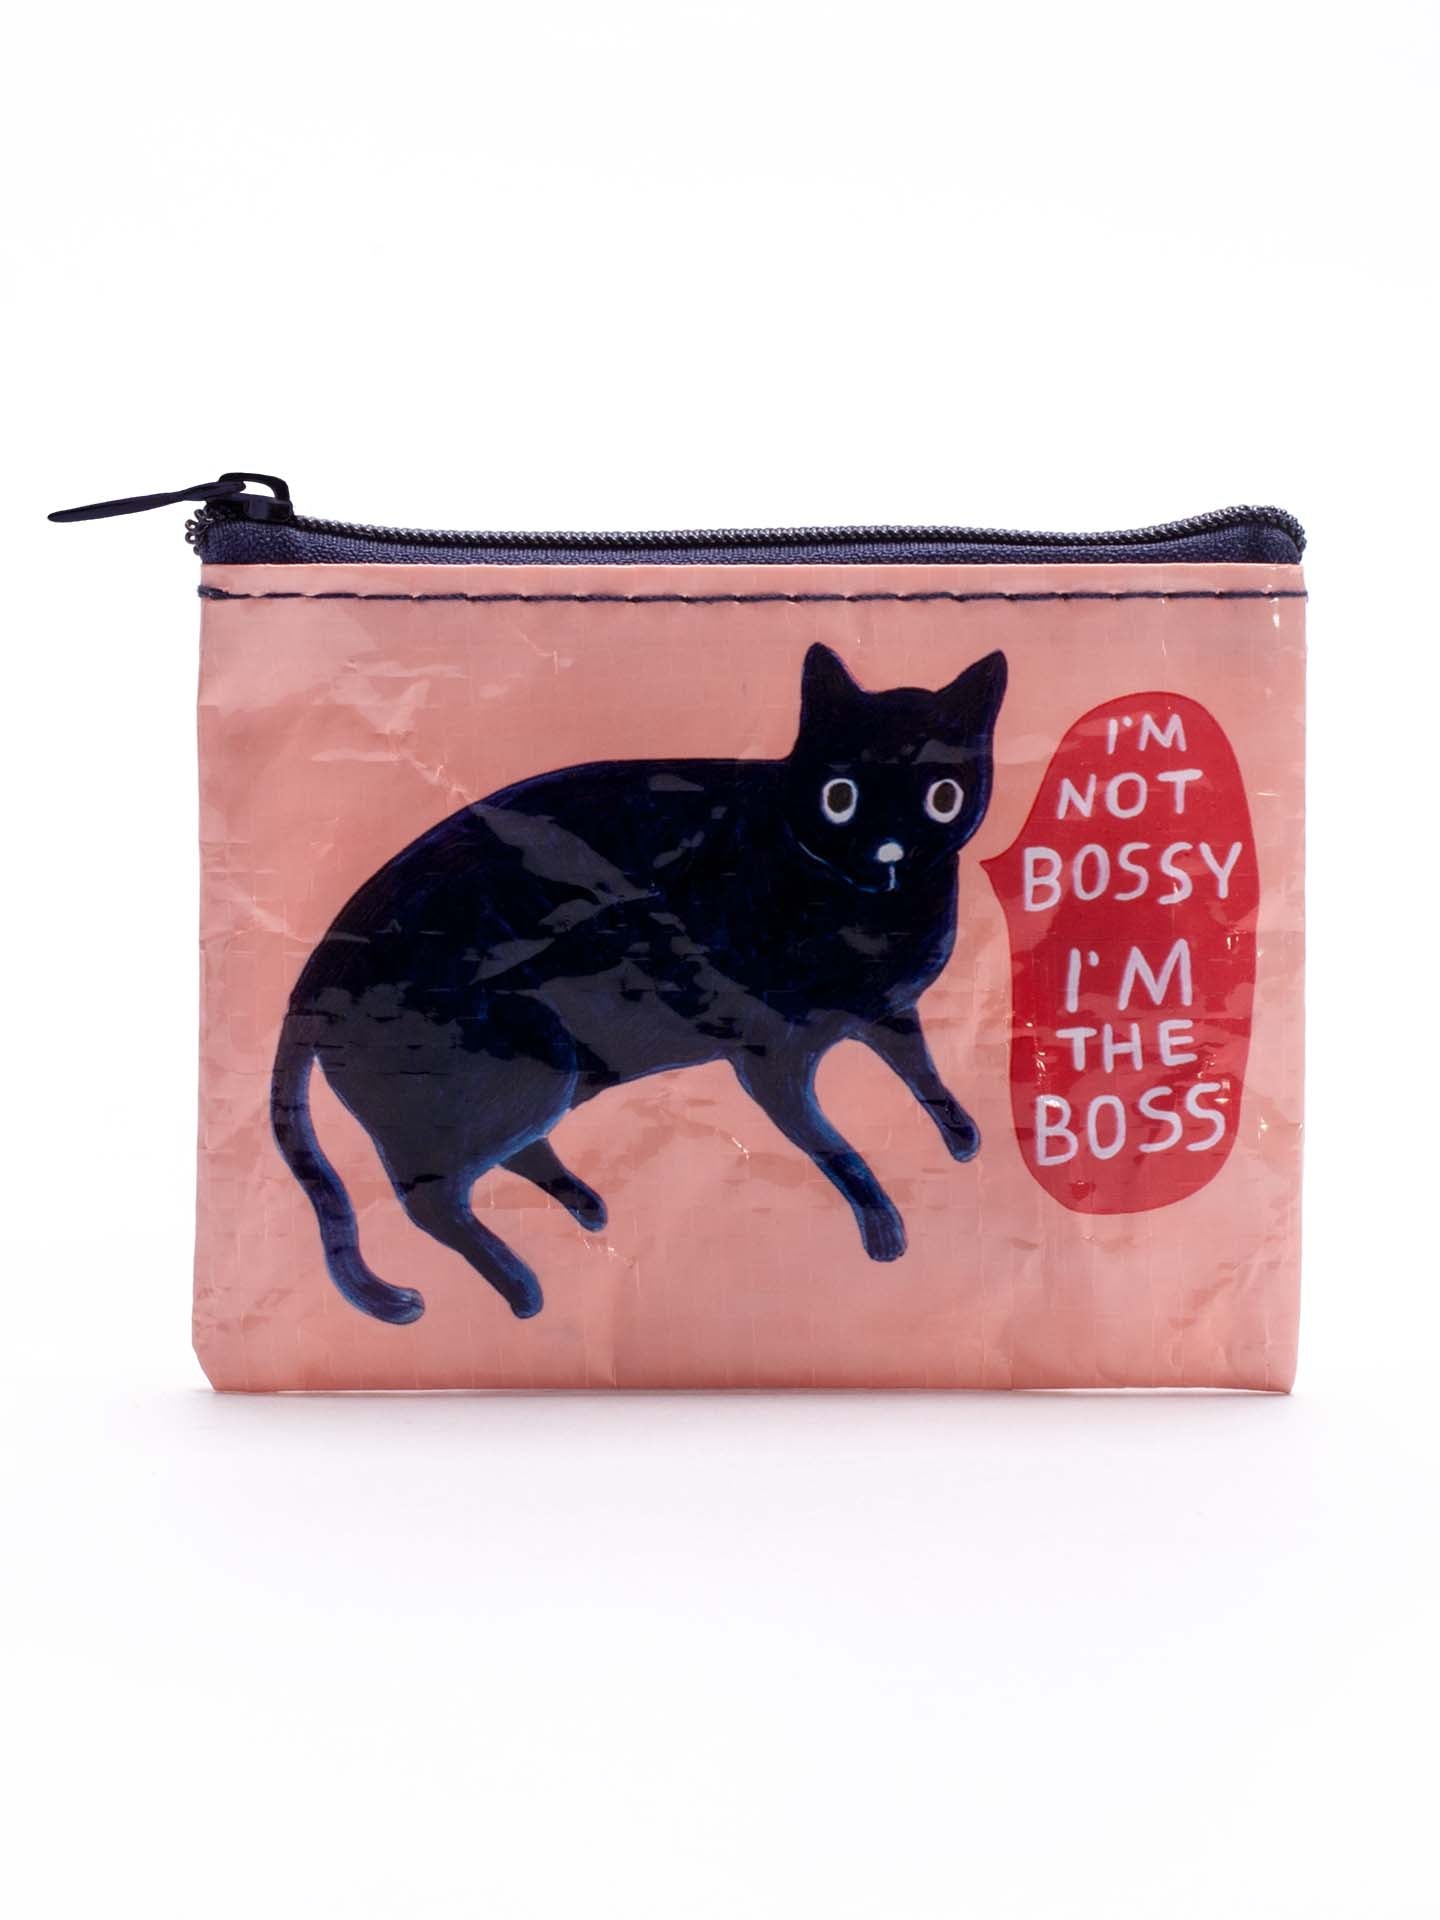 Blue Q Coin Purse - I'm Not Bossy, I'm The Boss    